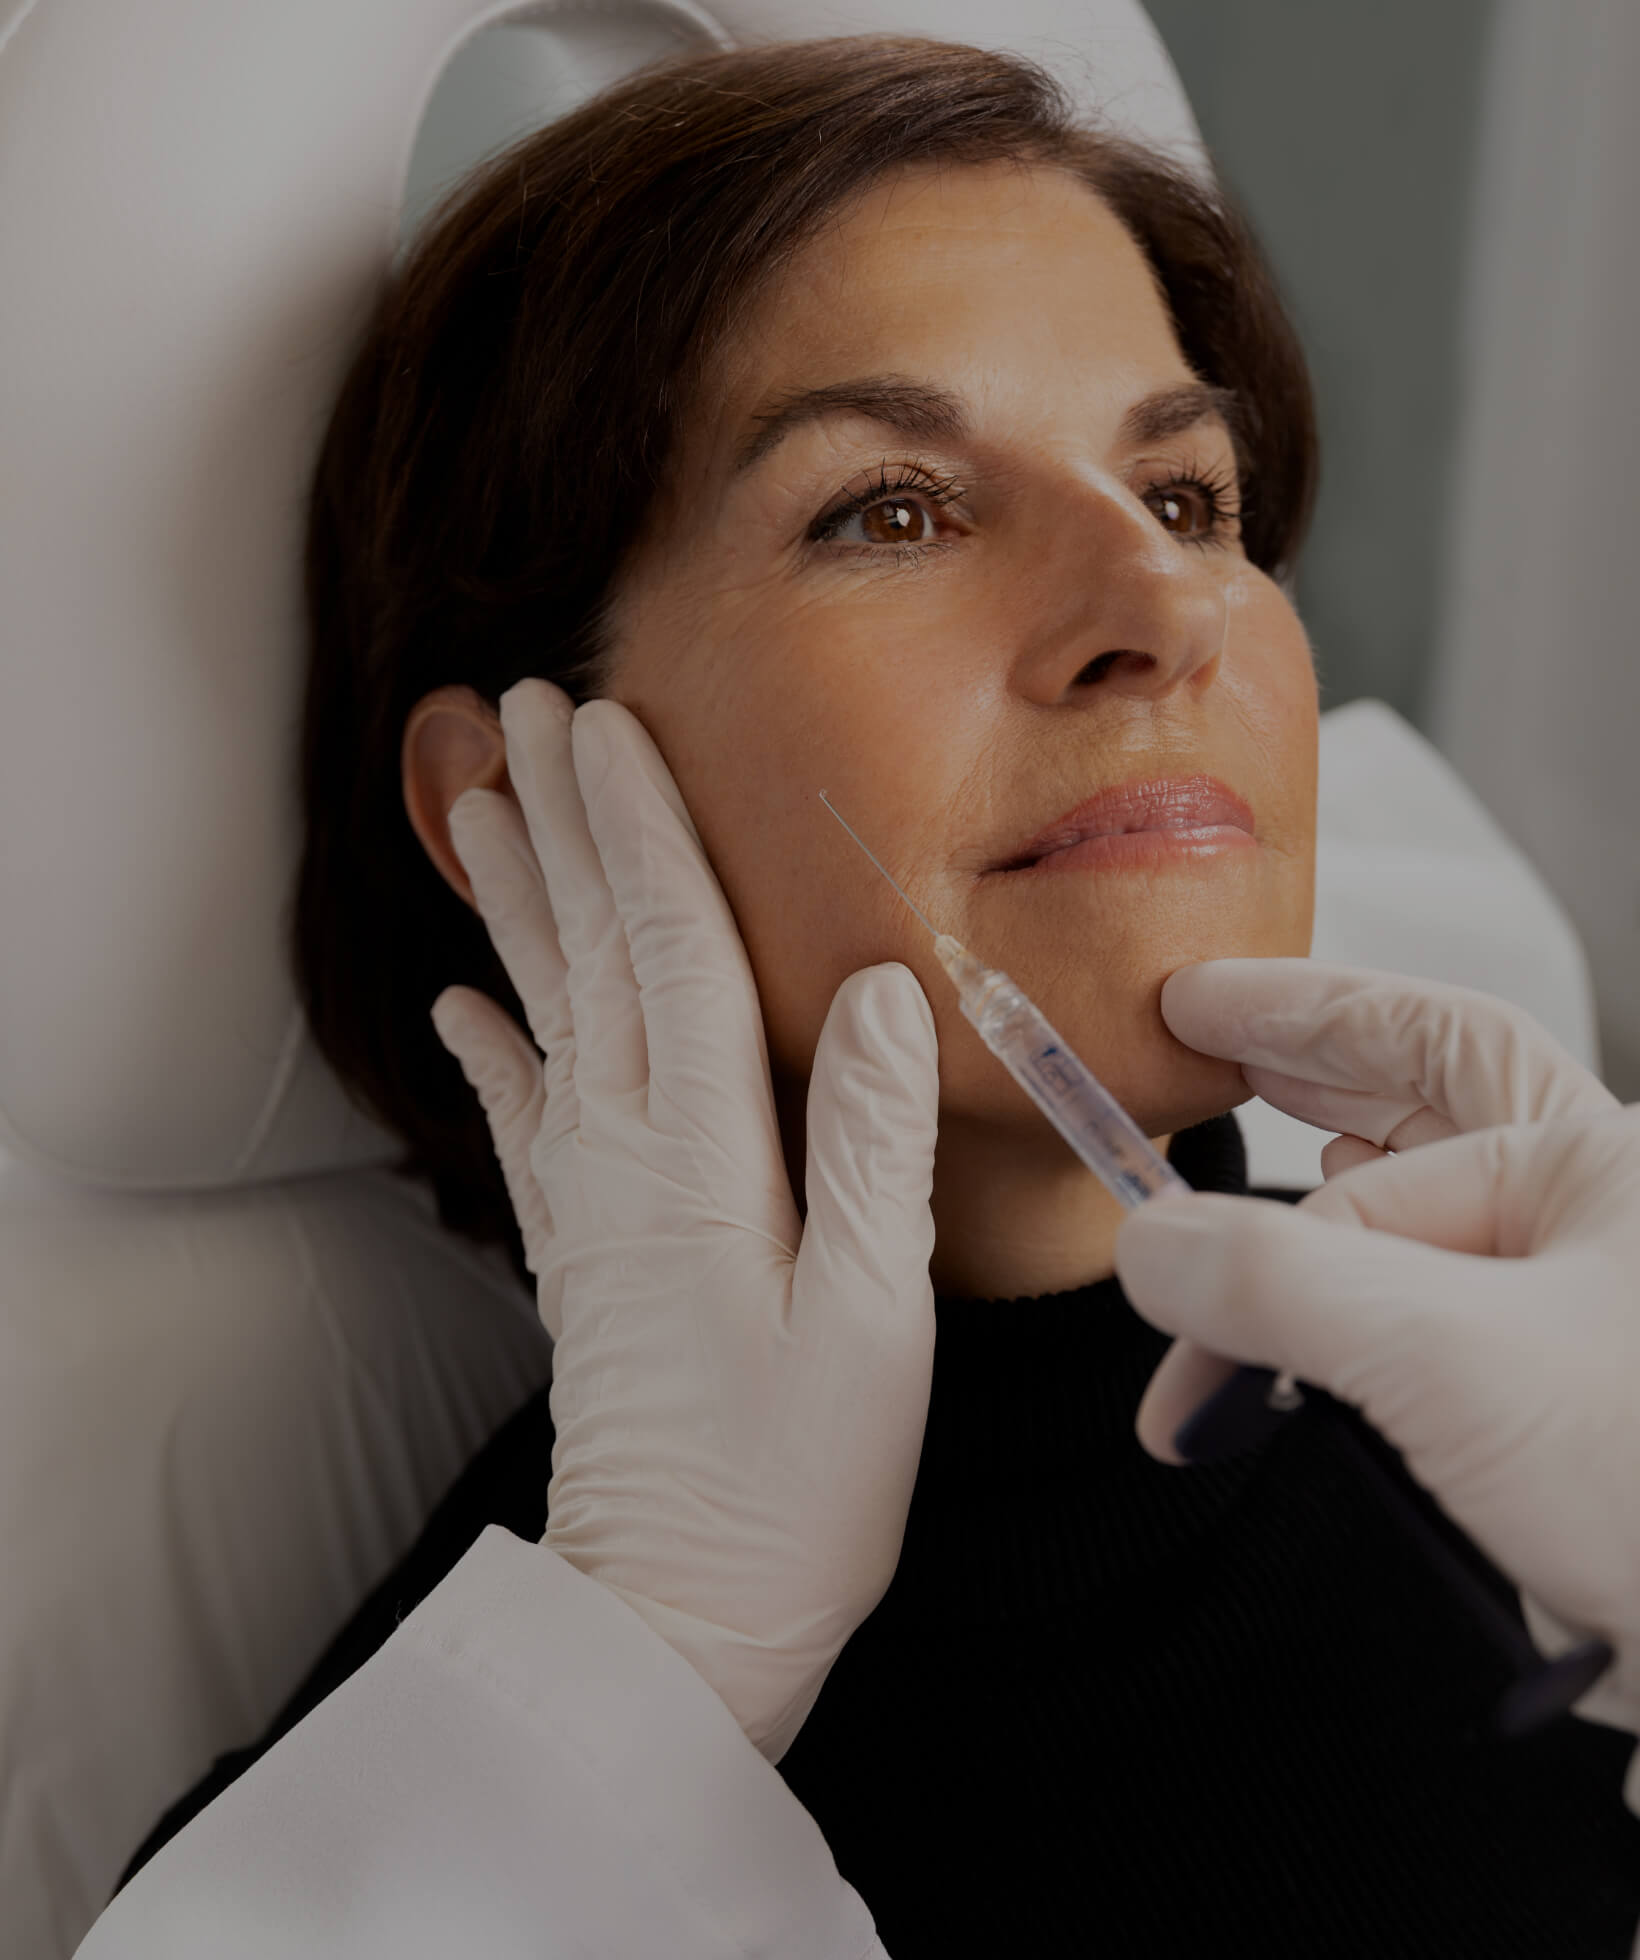 Dr. Chloé Sylvestre performing dermal filler injections in a female patient's cheekbones